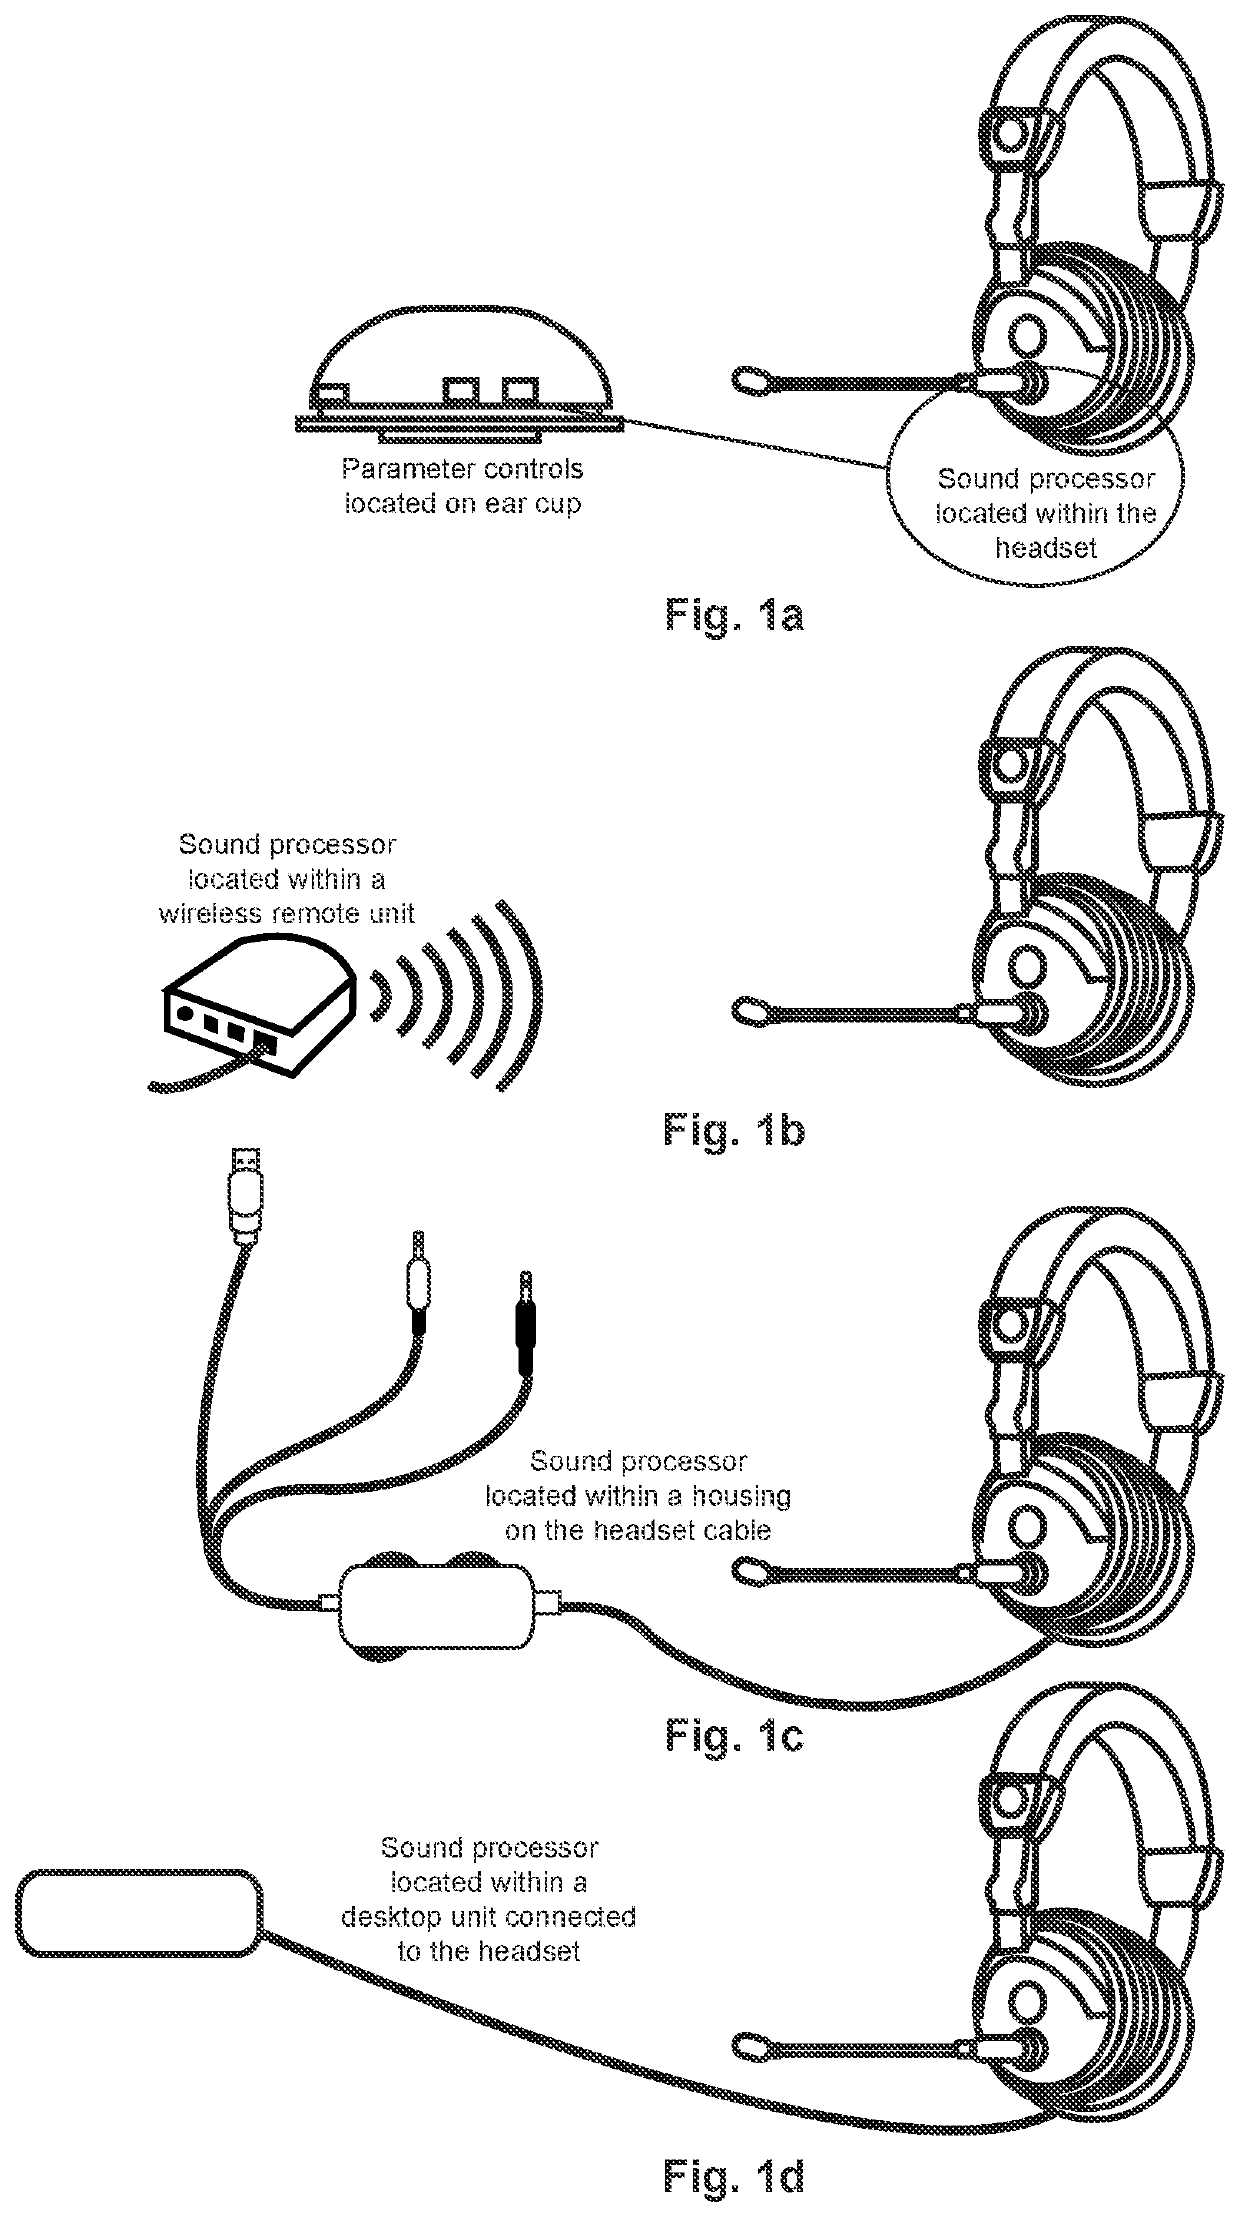 Gaming headset with programmable audio paths